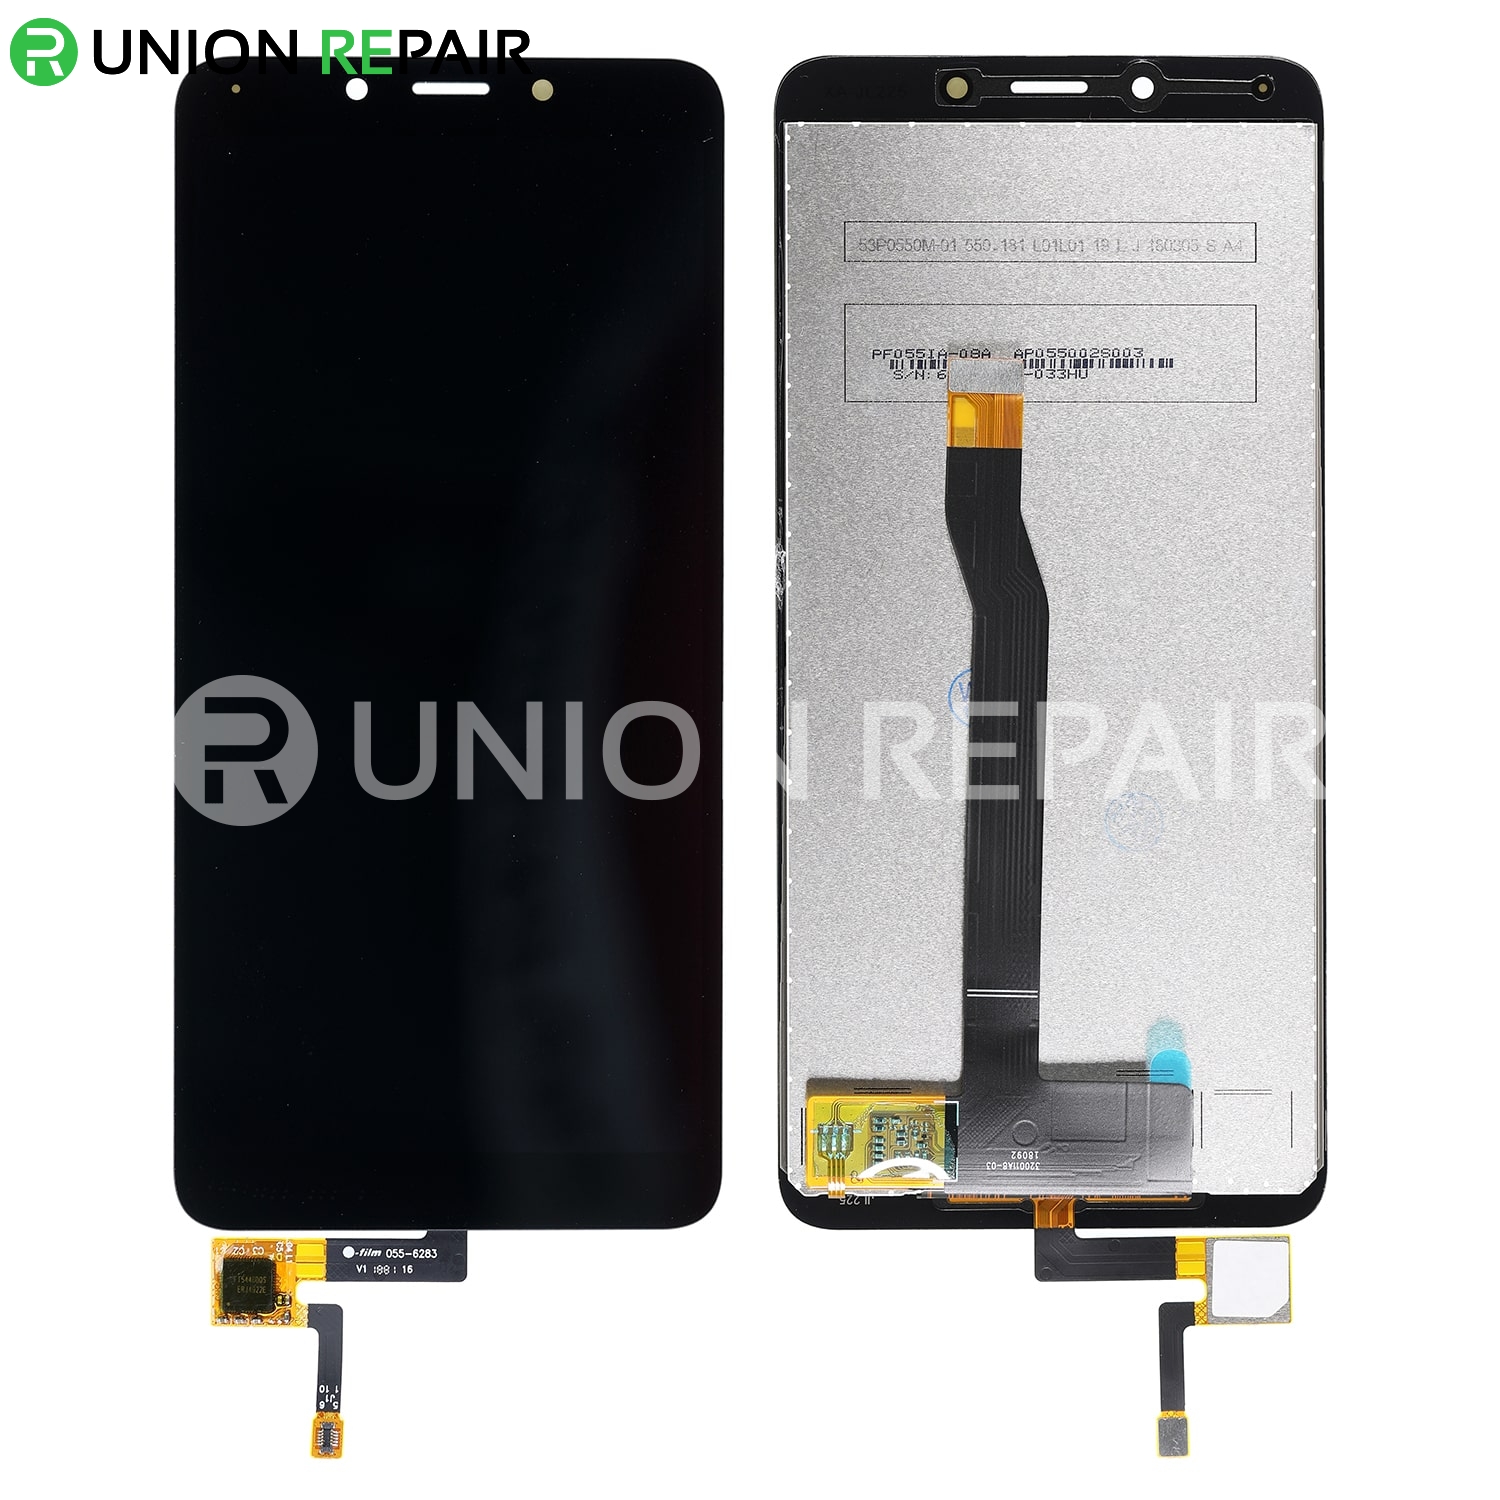 Replacement for RedMi 6 LCD Screen Digitizer - Black